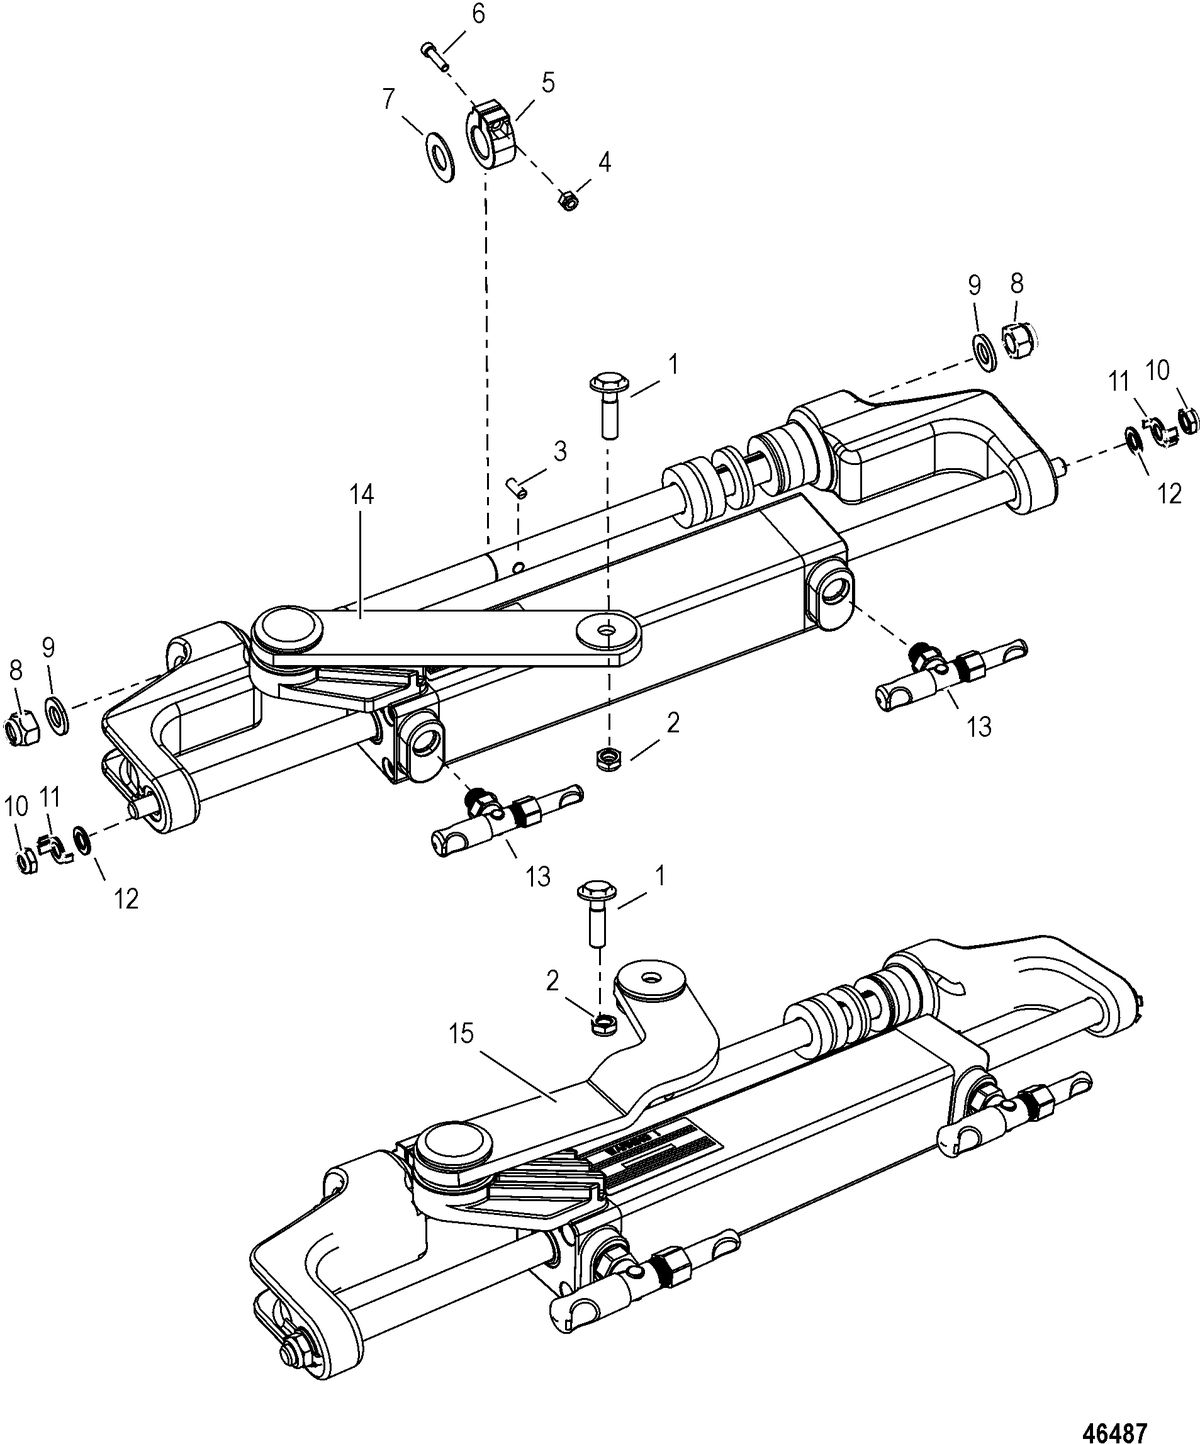 ACCESSORIES STEERING SYSTEMS AND COMPONENTS Steering Actuator Assembly(150 Hp and 1.5L OptiMax)